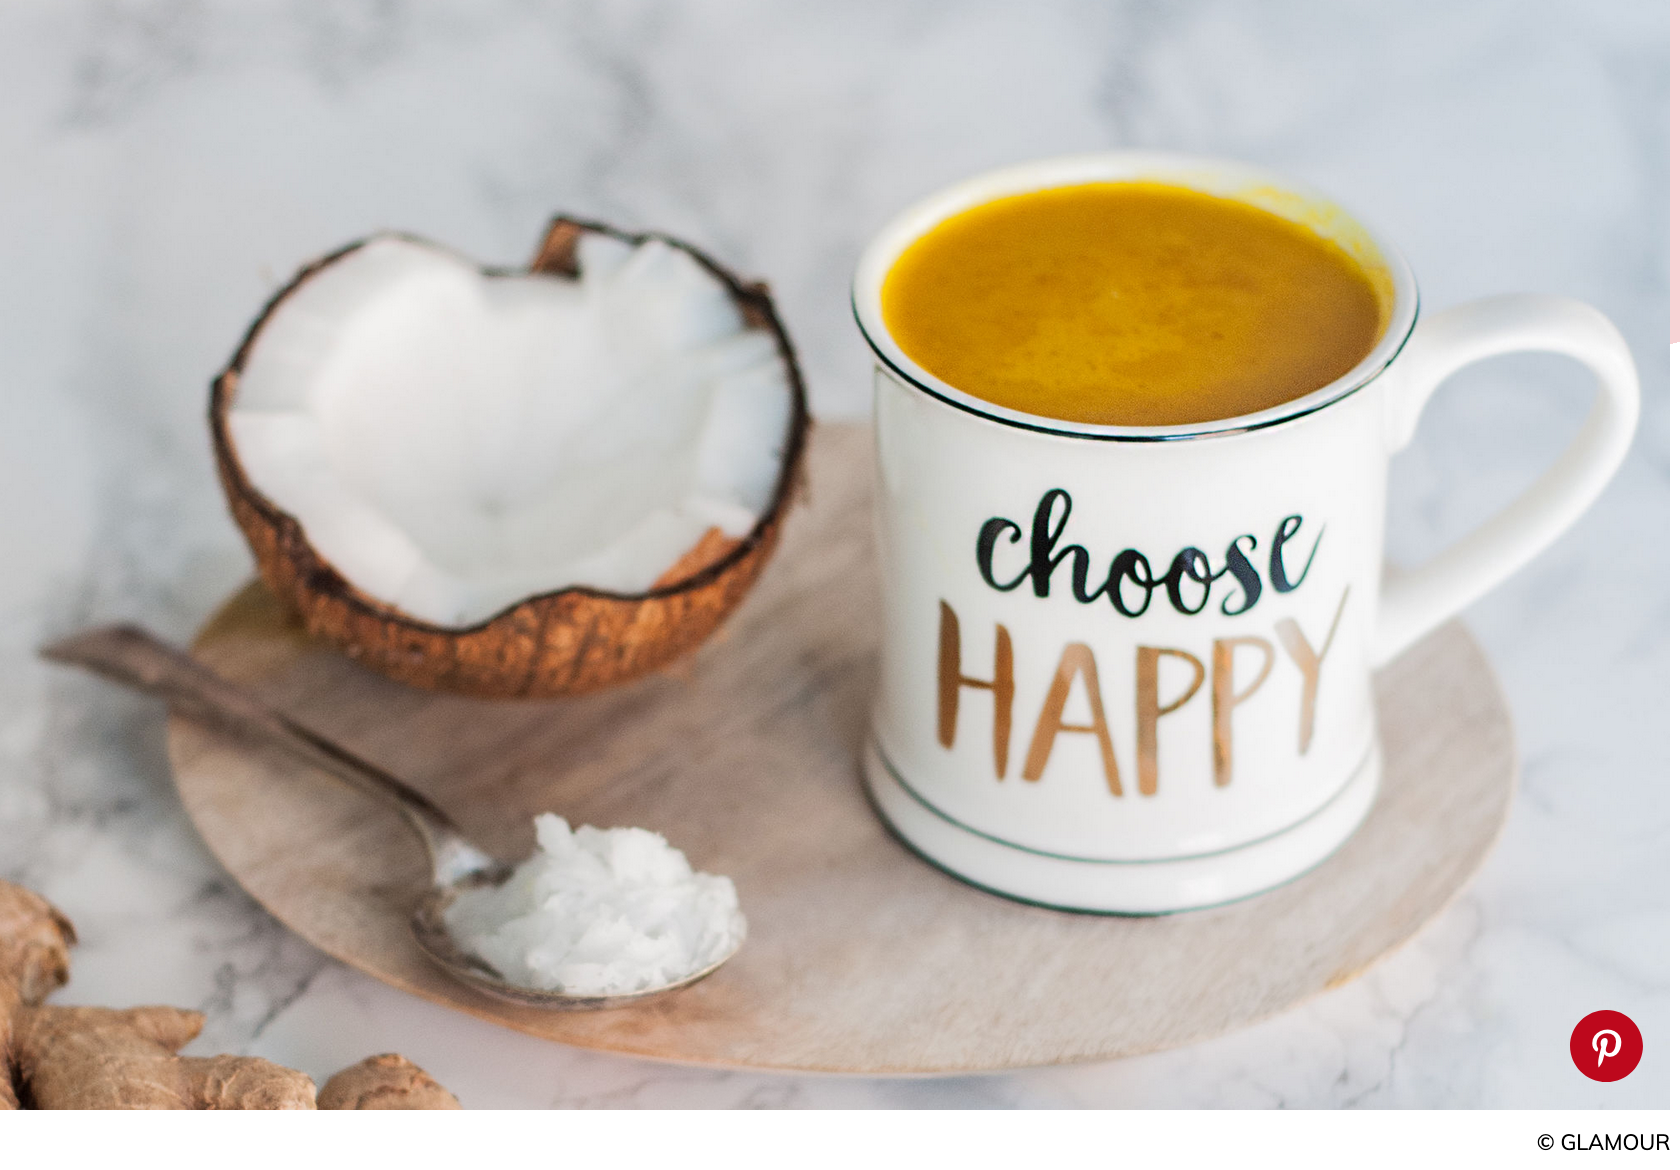 “GOLDEN MILK” AND THE HYPE ABOUT TURMERIC